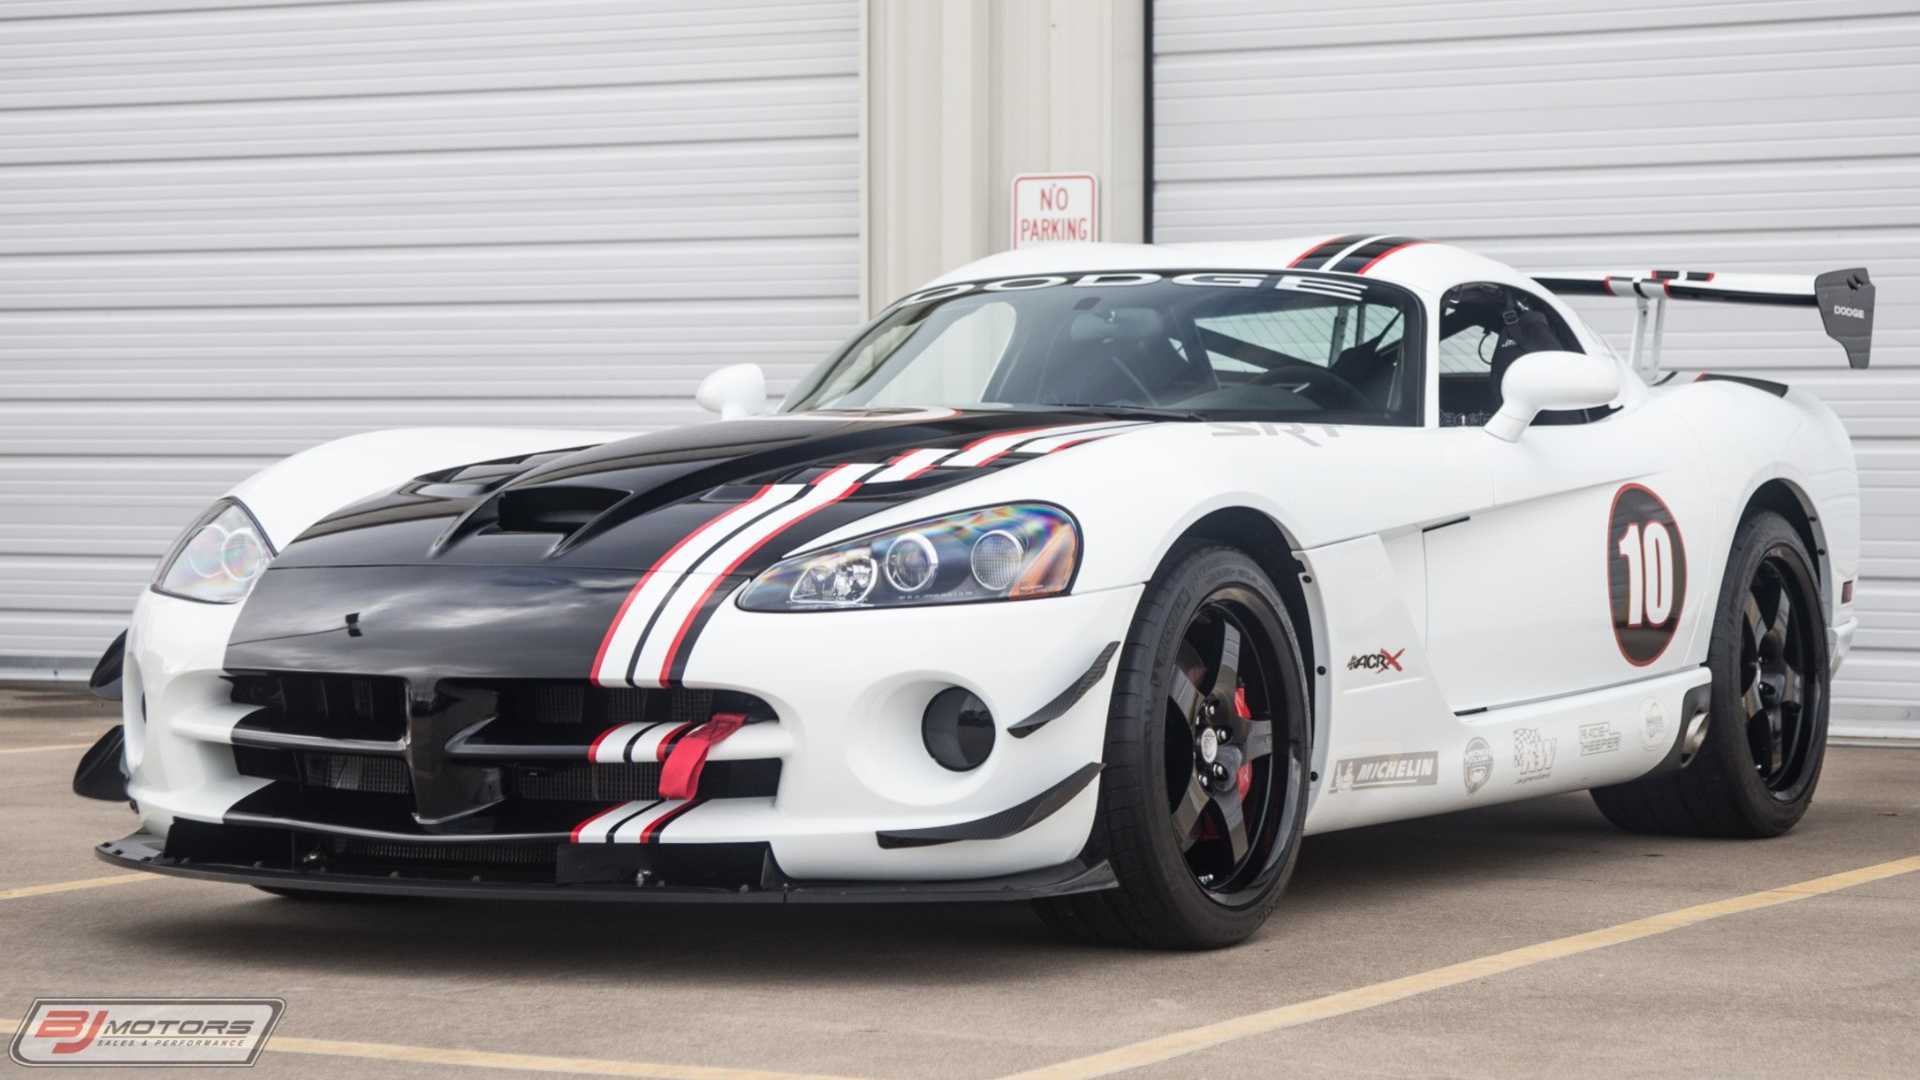 Rare 159 000 Dodge Viper Acr X Has Only 10 Miles